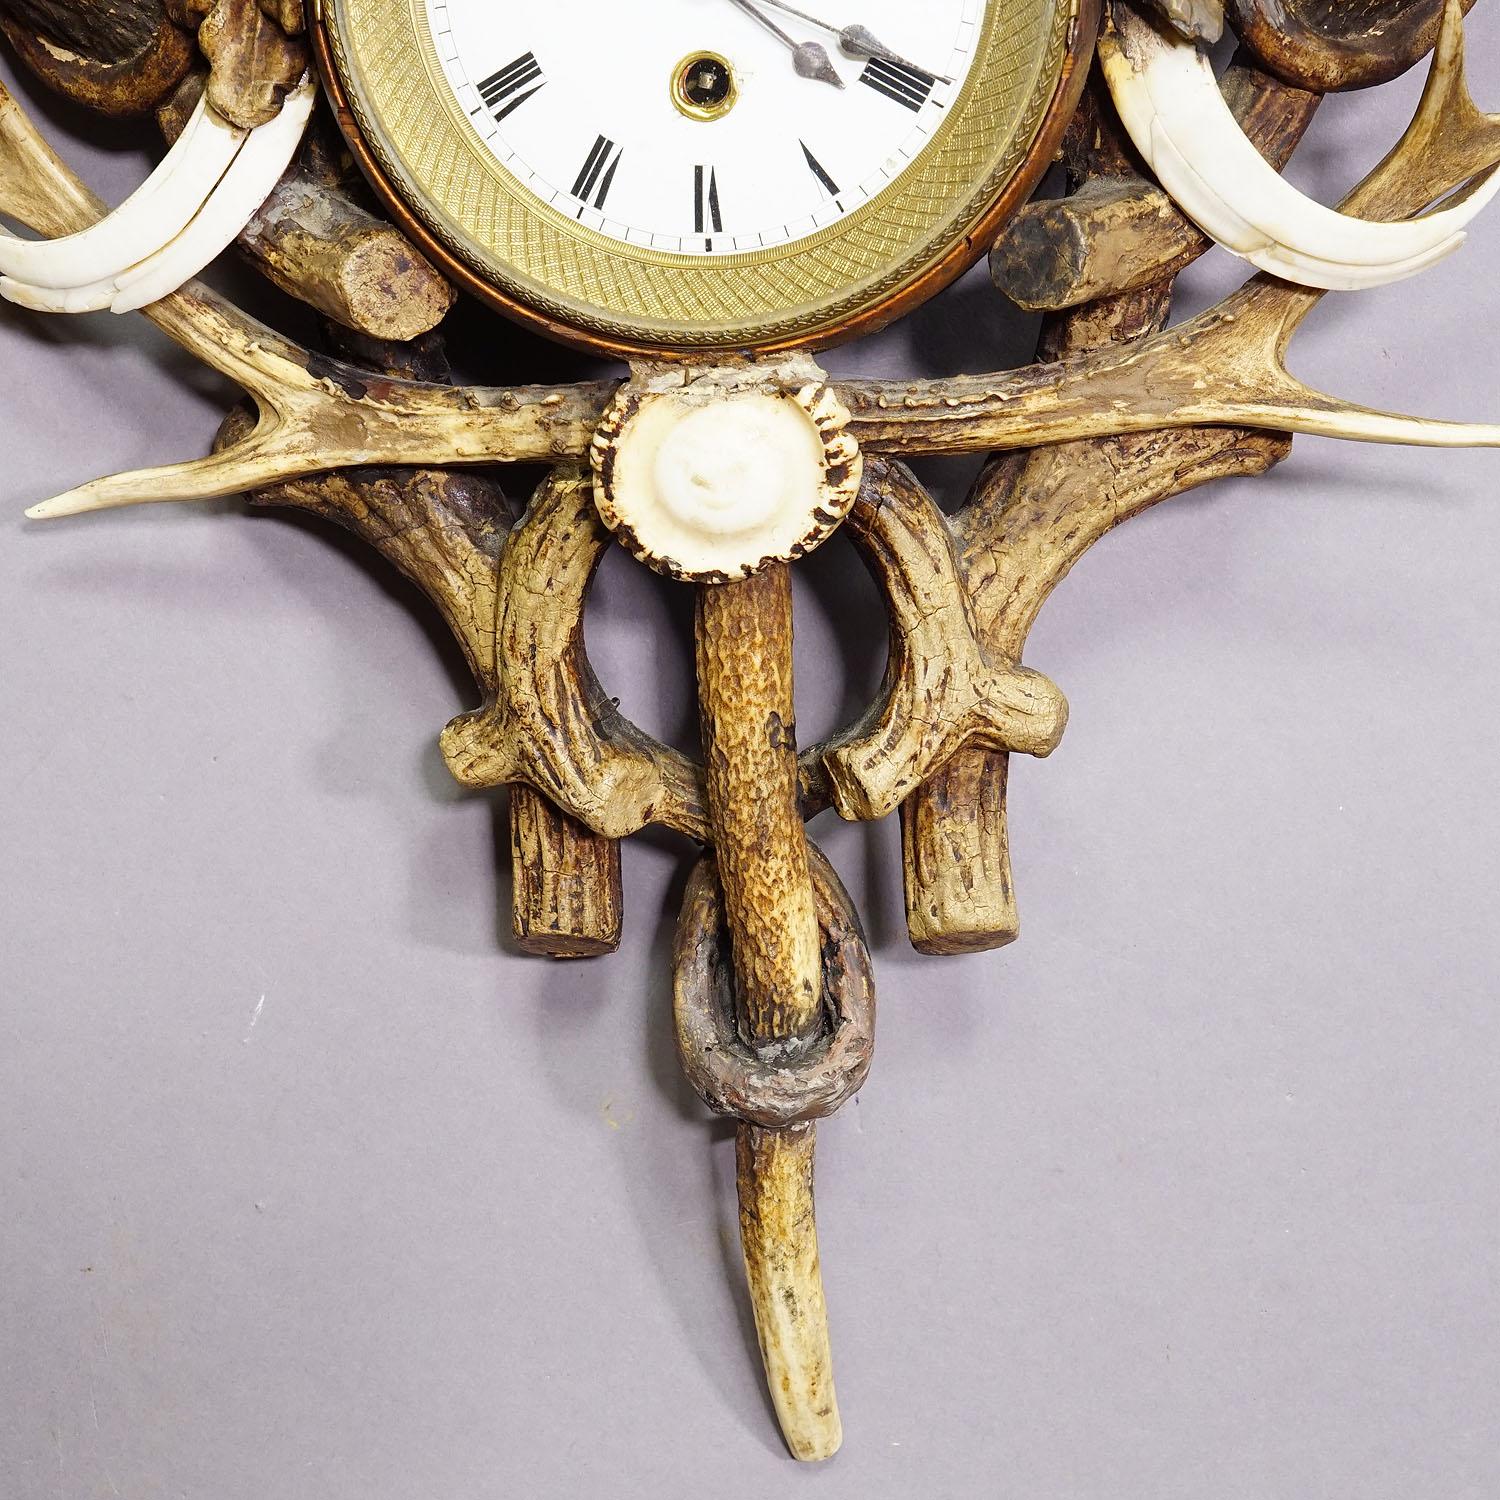 Antique Cabin Antler Wall Clock with Deer and Chamois Austria ca. 1900 In Good Condition For Sale In Berghuelen, DE